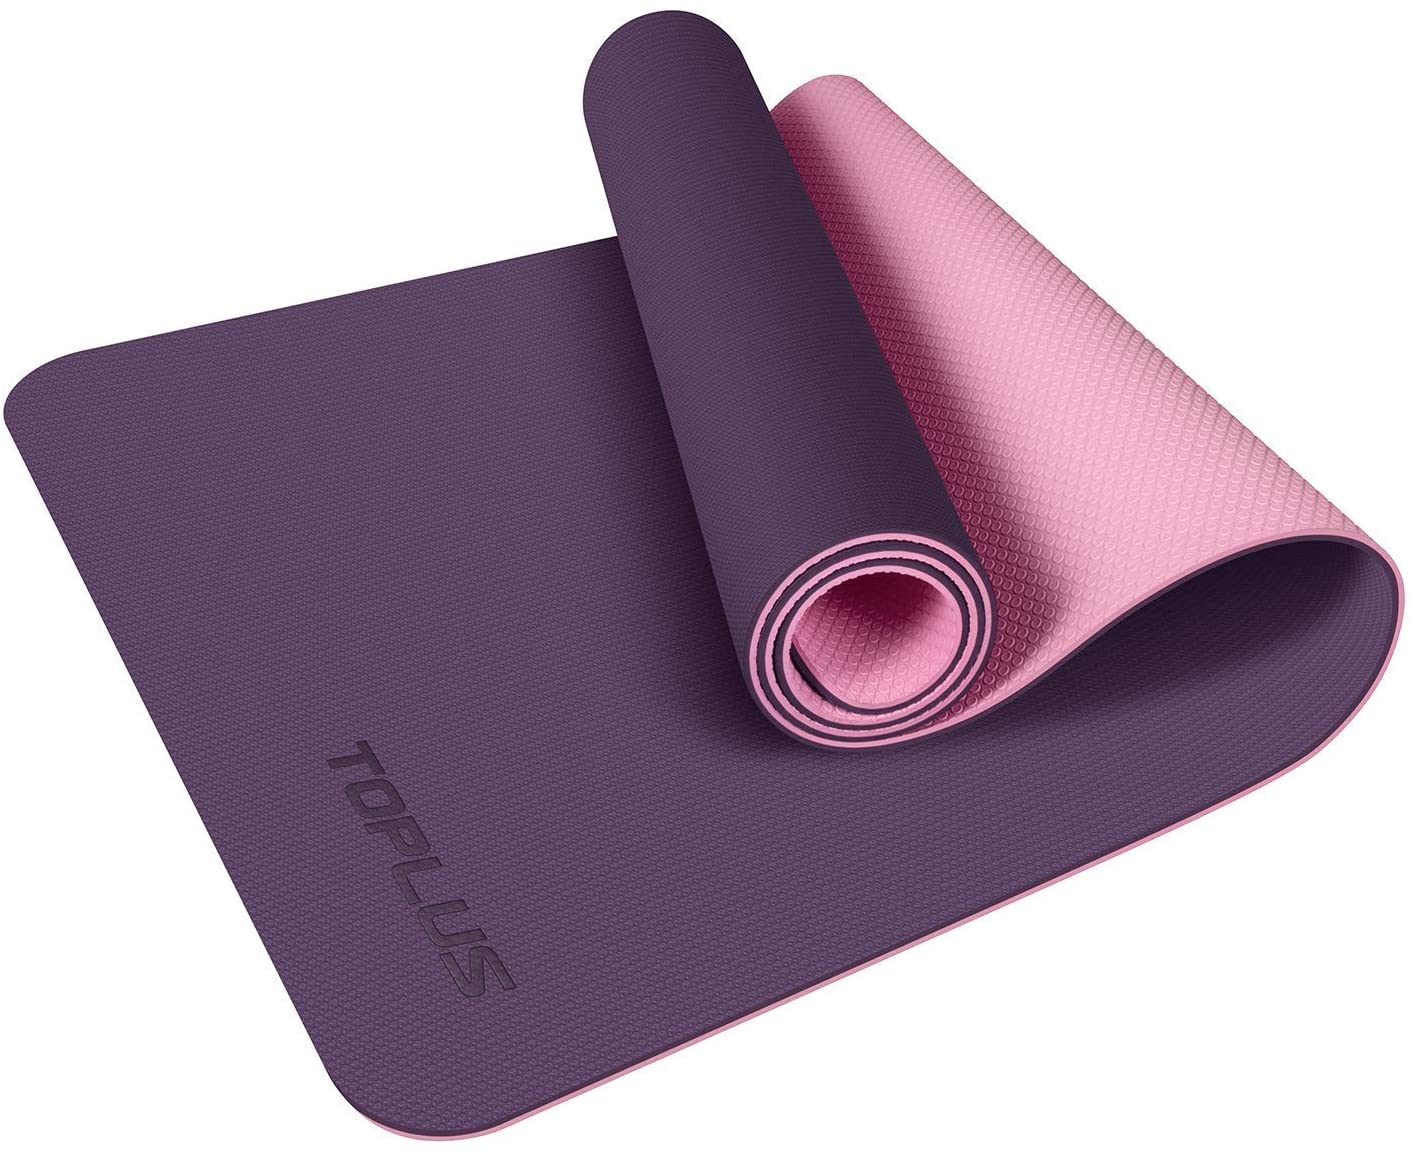 Best Yoga Mats for Hot Yoga: Expert's Top 7 Picks in 2020 (Reviewed)